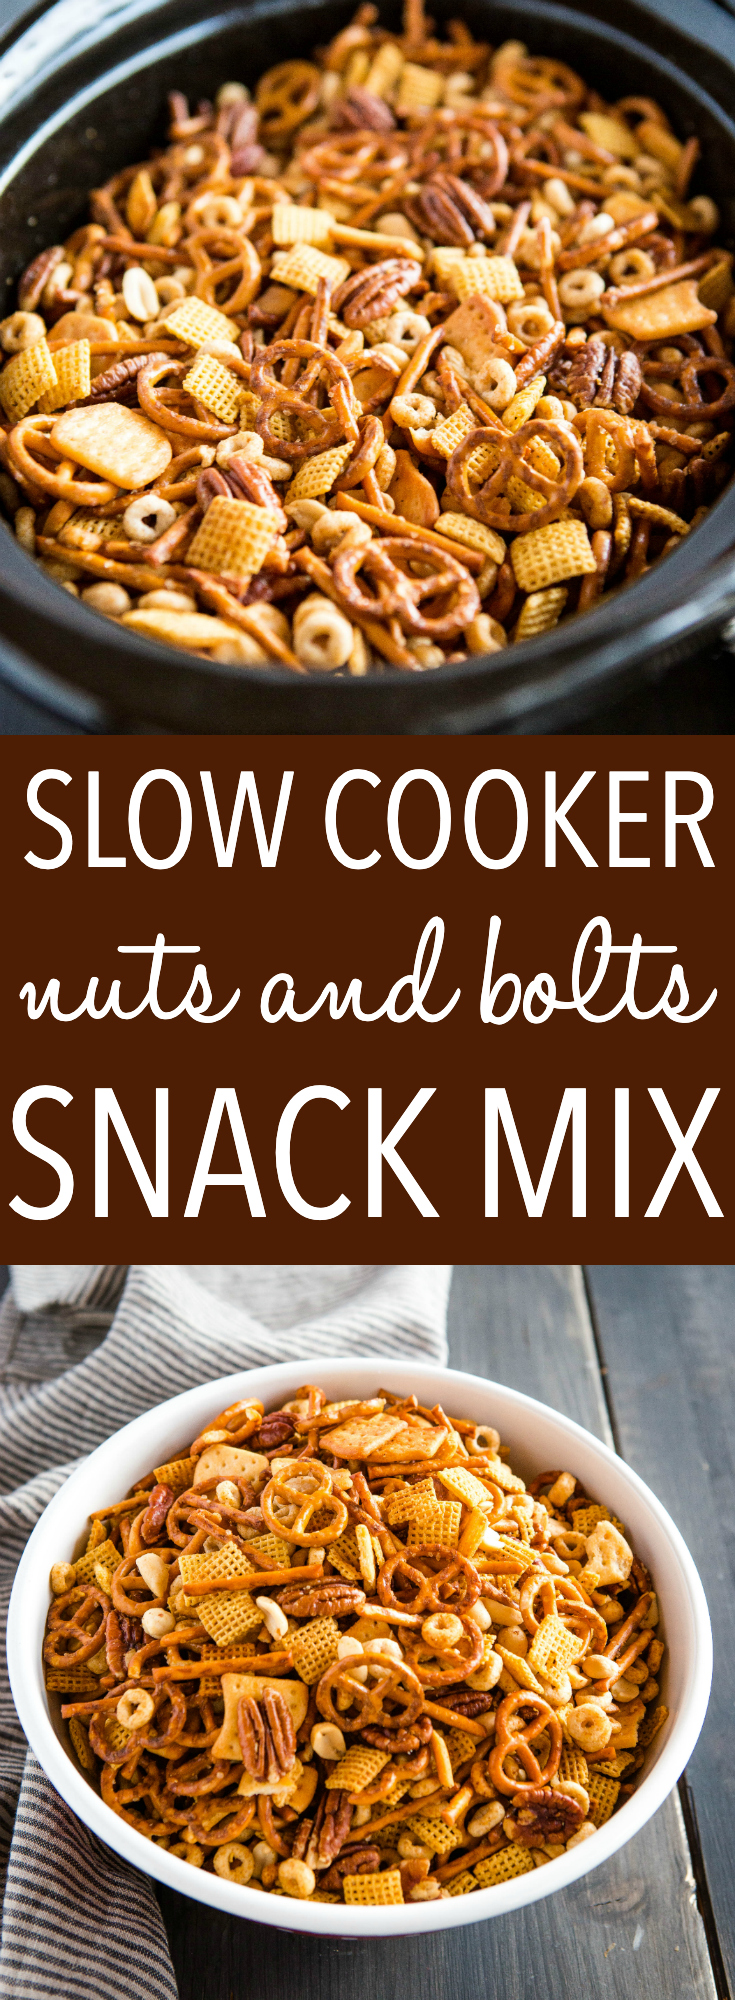 This Slow Cooker Nuts and Bolts Snack Mix is an easy, delicious, homemade savoury snack for the holidays or game day! Customize it to your family's tastes and make it in your crock pot! Recipe from thebusybaker.ca! #snackmix #chexmix #nutsandbolts #ediblegifts #christmas #holidays #kidfriendly #slowcooker #crockpot #recipe #easy #fun #family via @busybakerblog